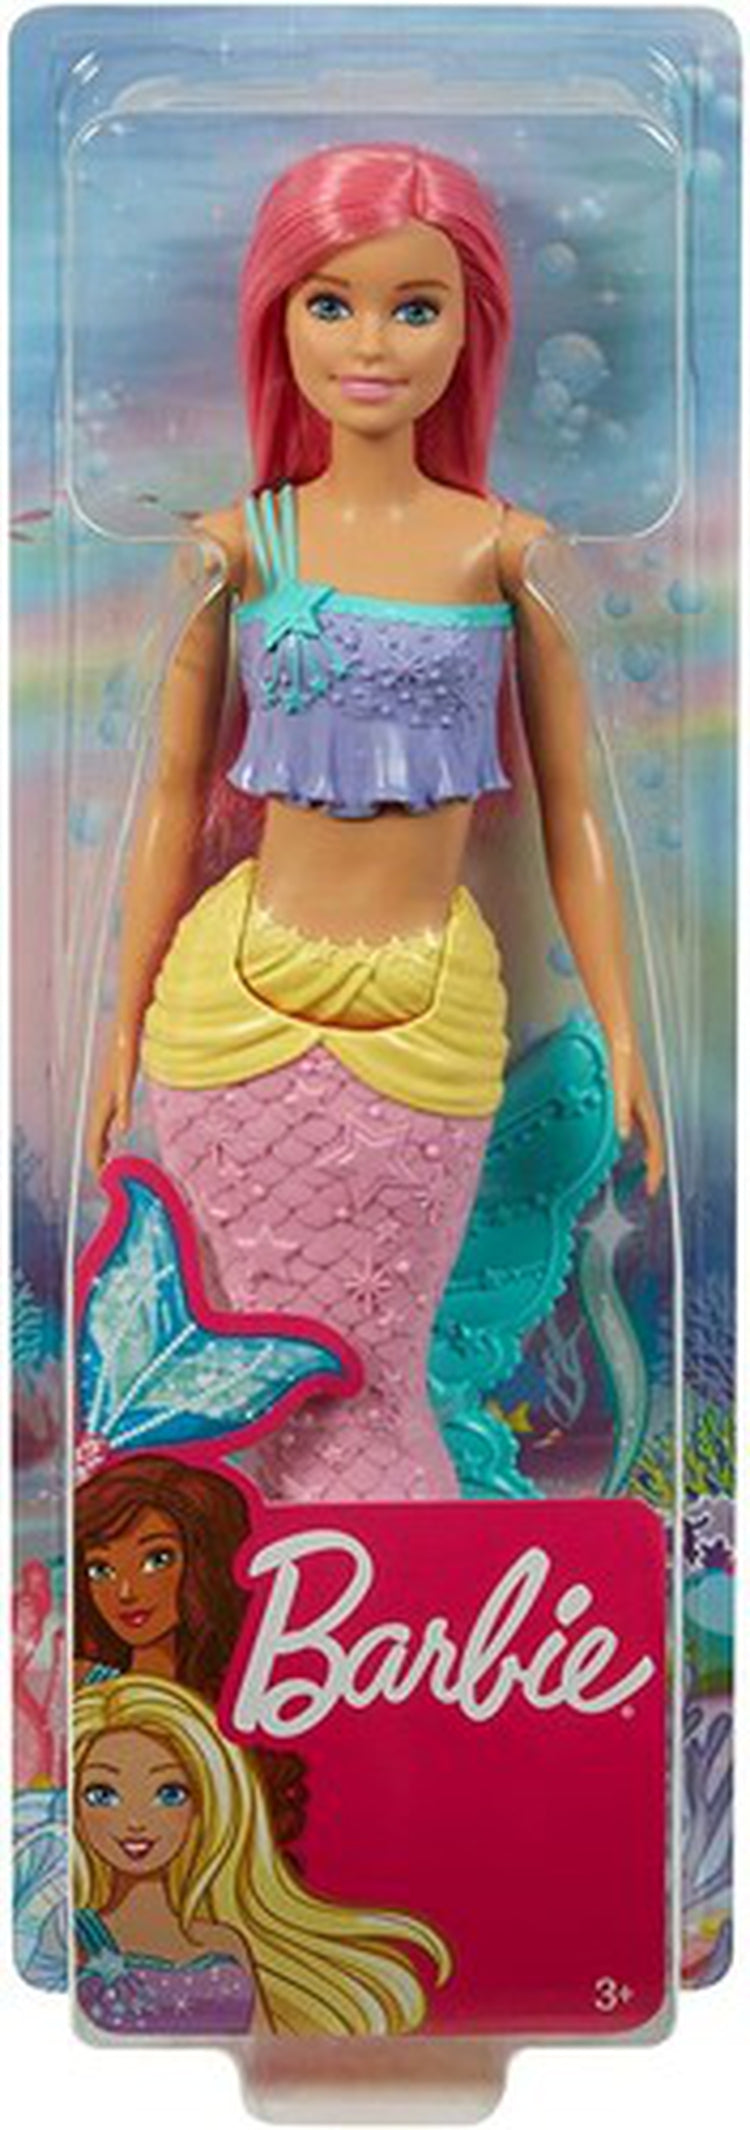 Mattel - Barbie Mermaid Doll with Pink Hair and Tail